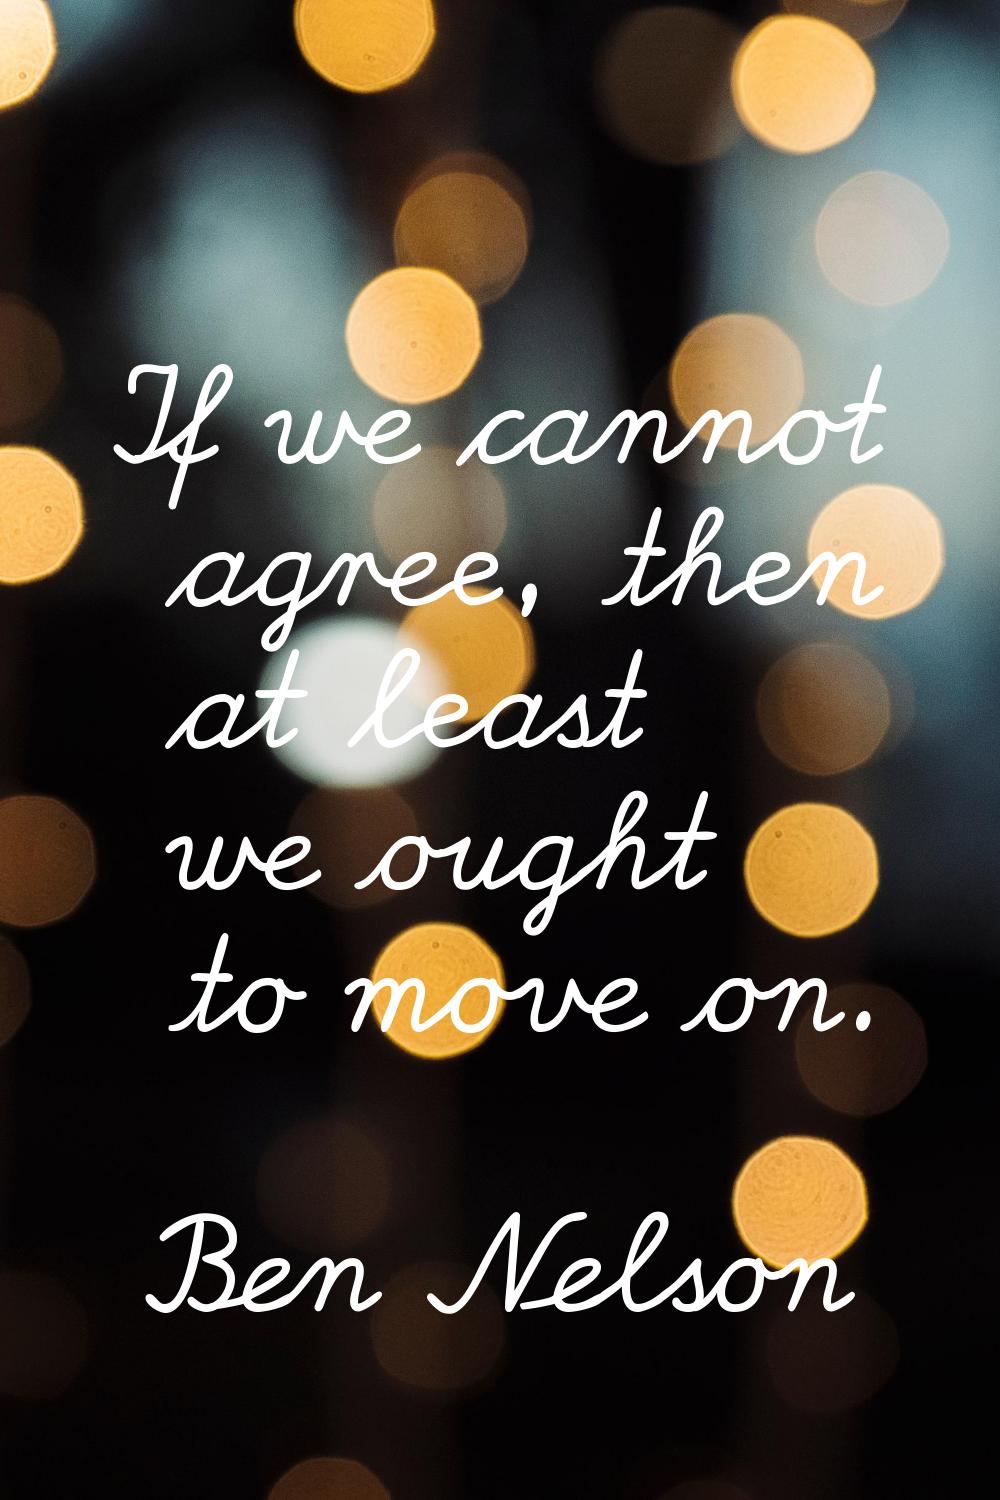 If we cannot agree, then at least we ought to move on.